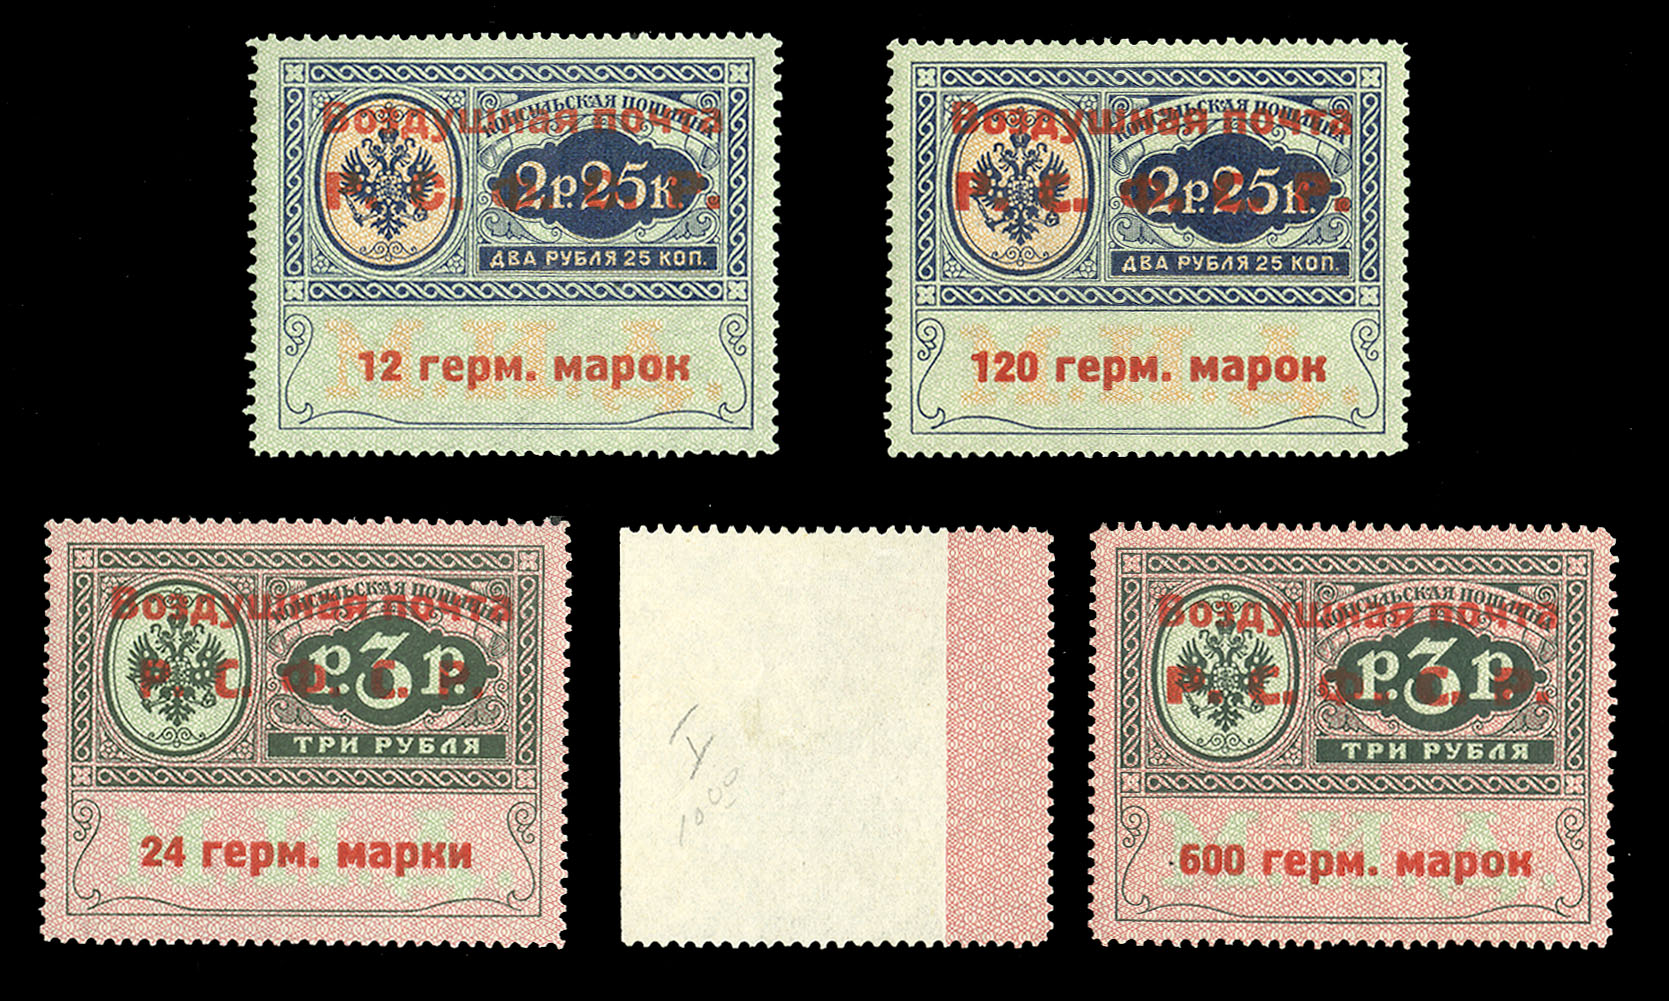 Lot 1243 - RUSSIA  Flight Covers  -  Cherrystone Auctions U.S. & Worldwide Stamps & Postal History